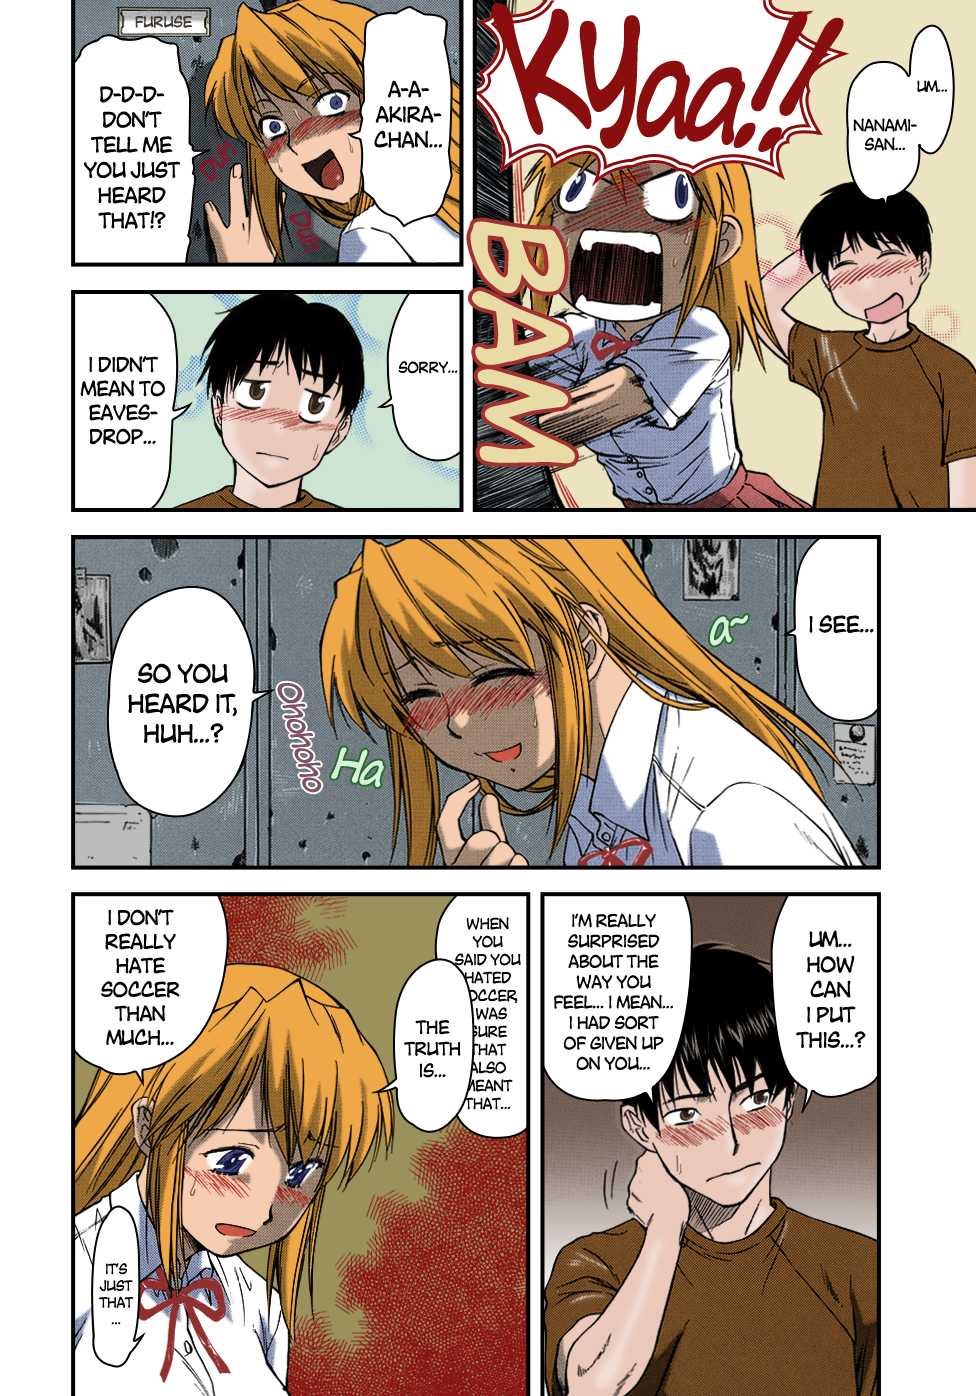 [Nagare Ippon] Offside Girl Ch. 1-4 [English] [Colorized] [Decensored] [WIP] - Page 14